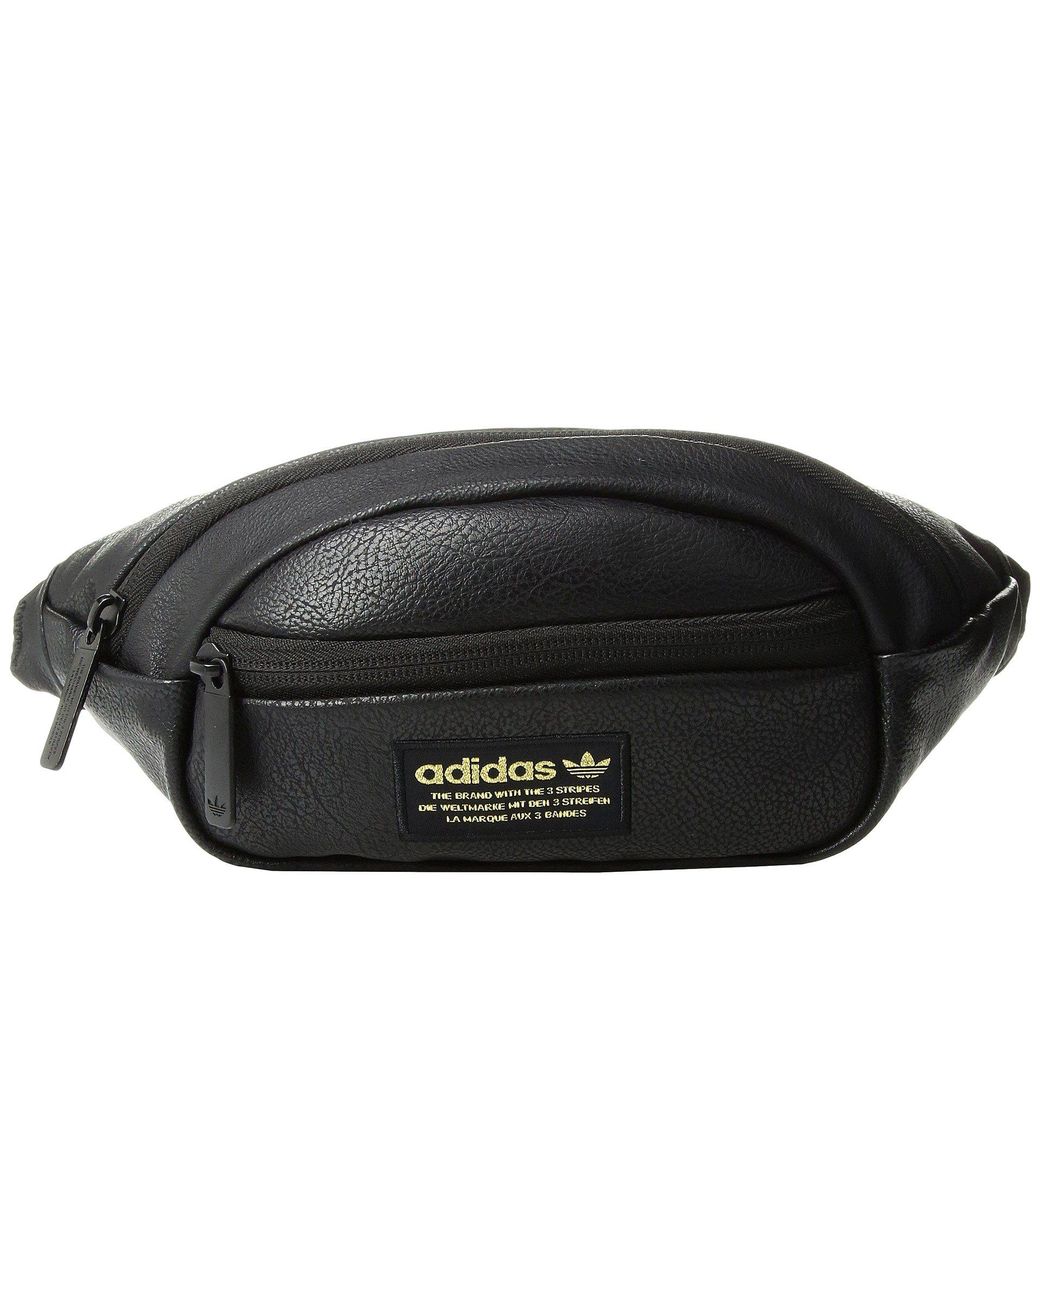 adidas Originals Synthetic Originals National Waist Pack in Black pu  Leather/Gold (Black) | Lyst